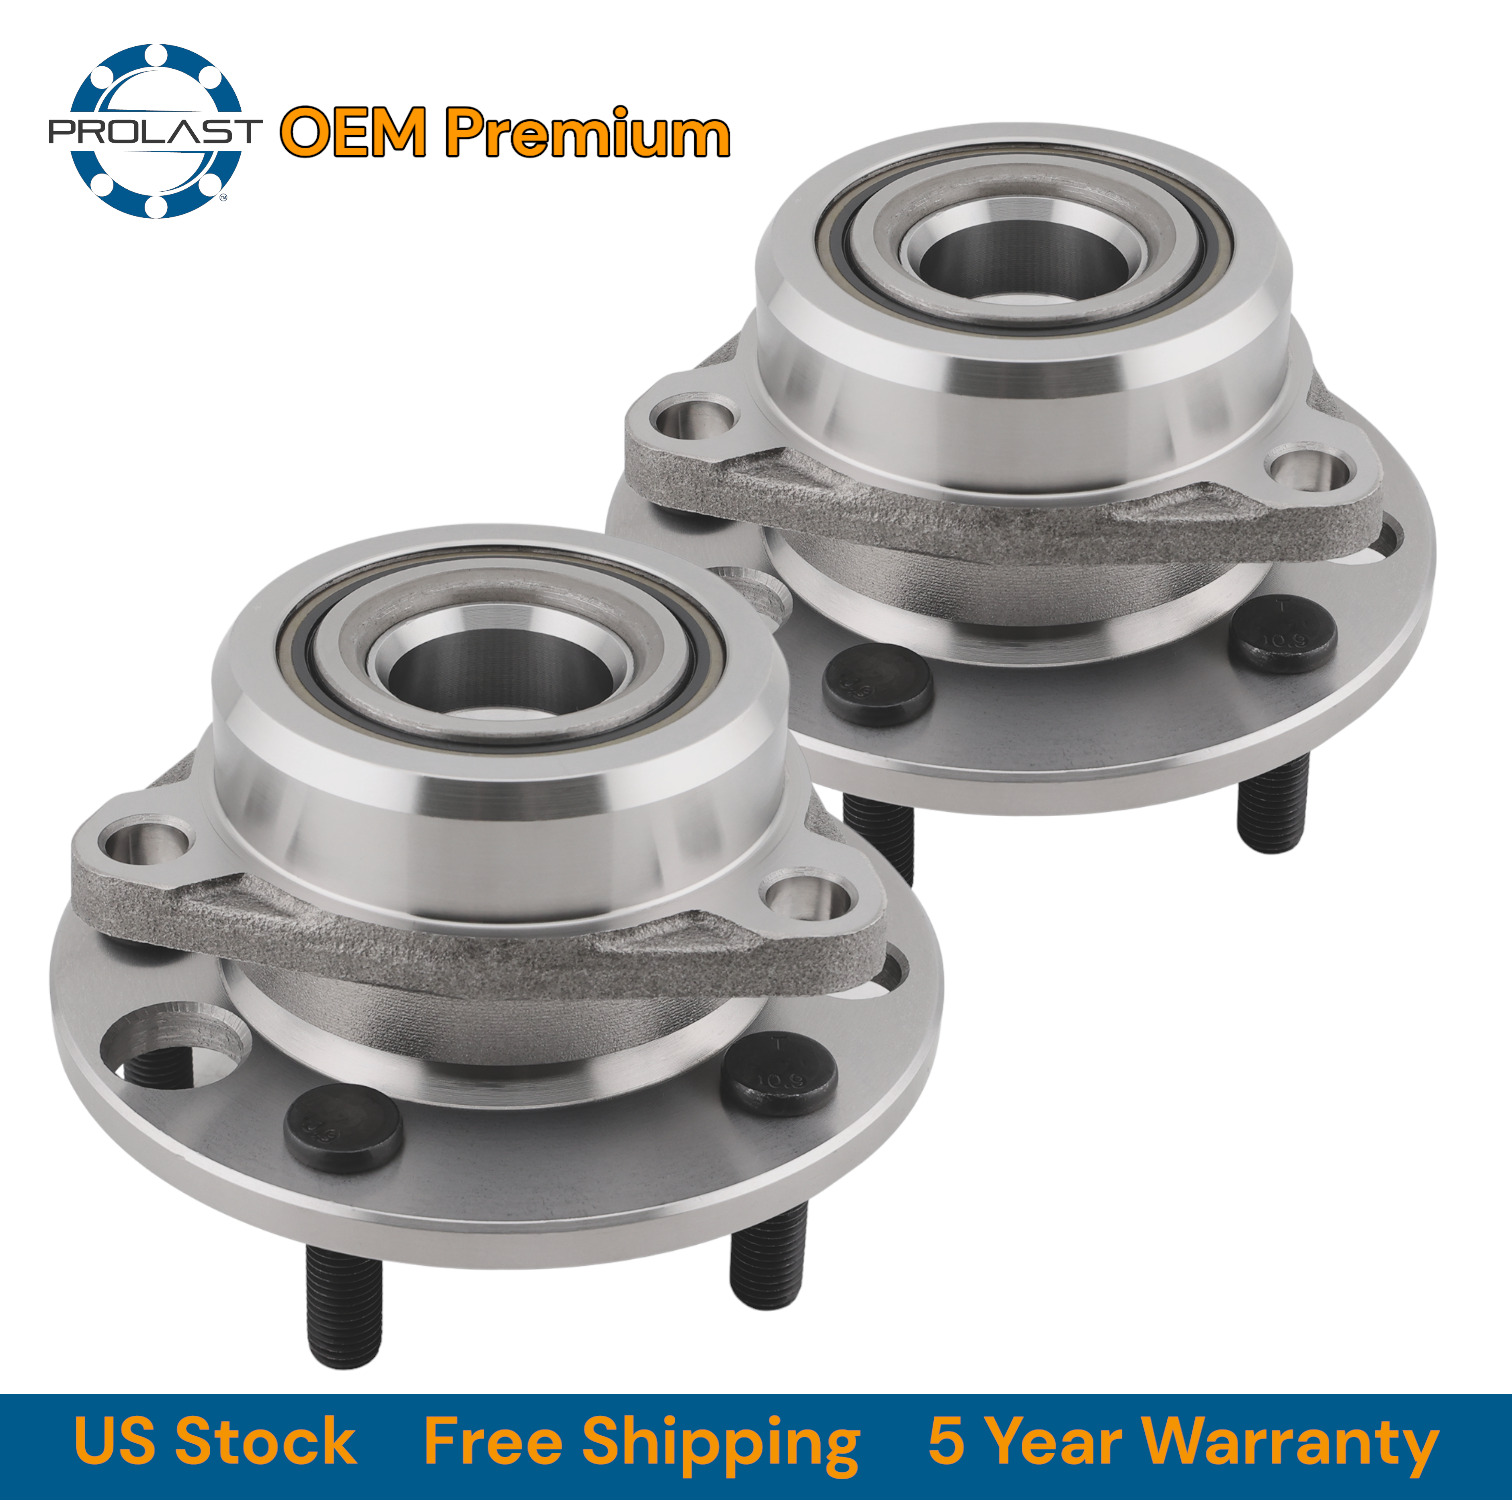 2pcs 513016K FRONT Wheel Hub Bearing Assembly for 1983-1993 Buick Century FWD